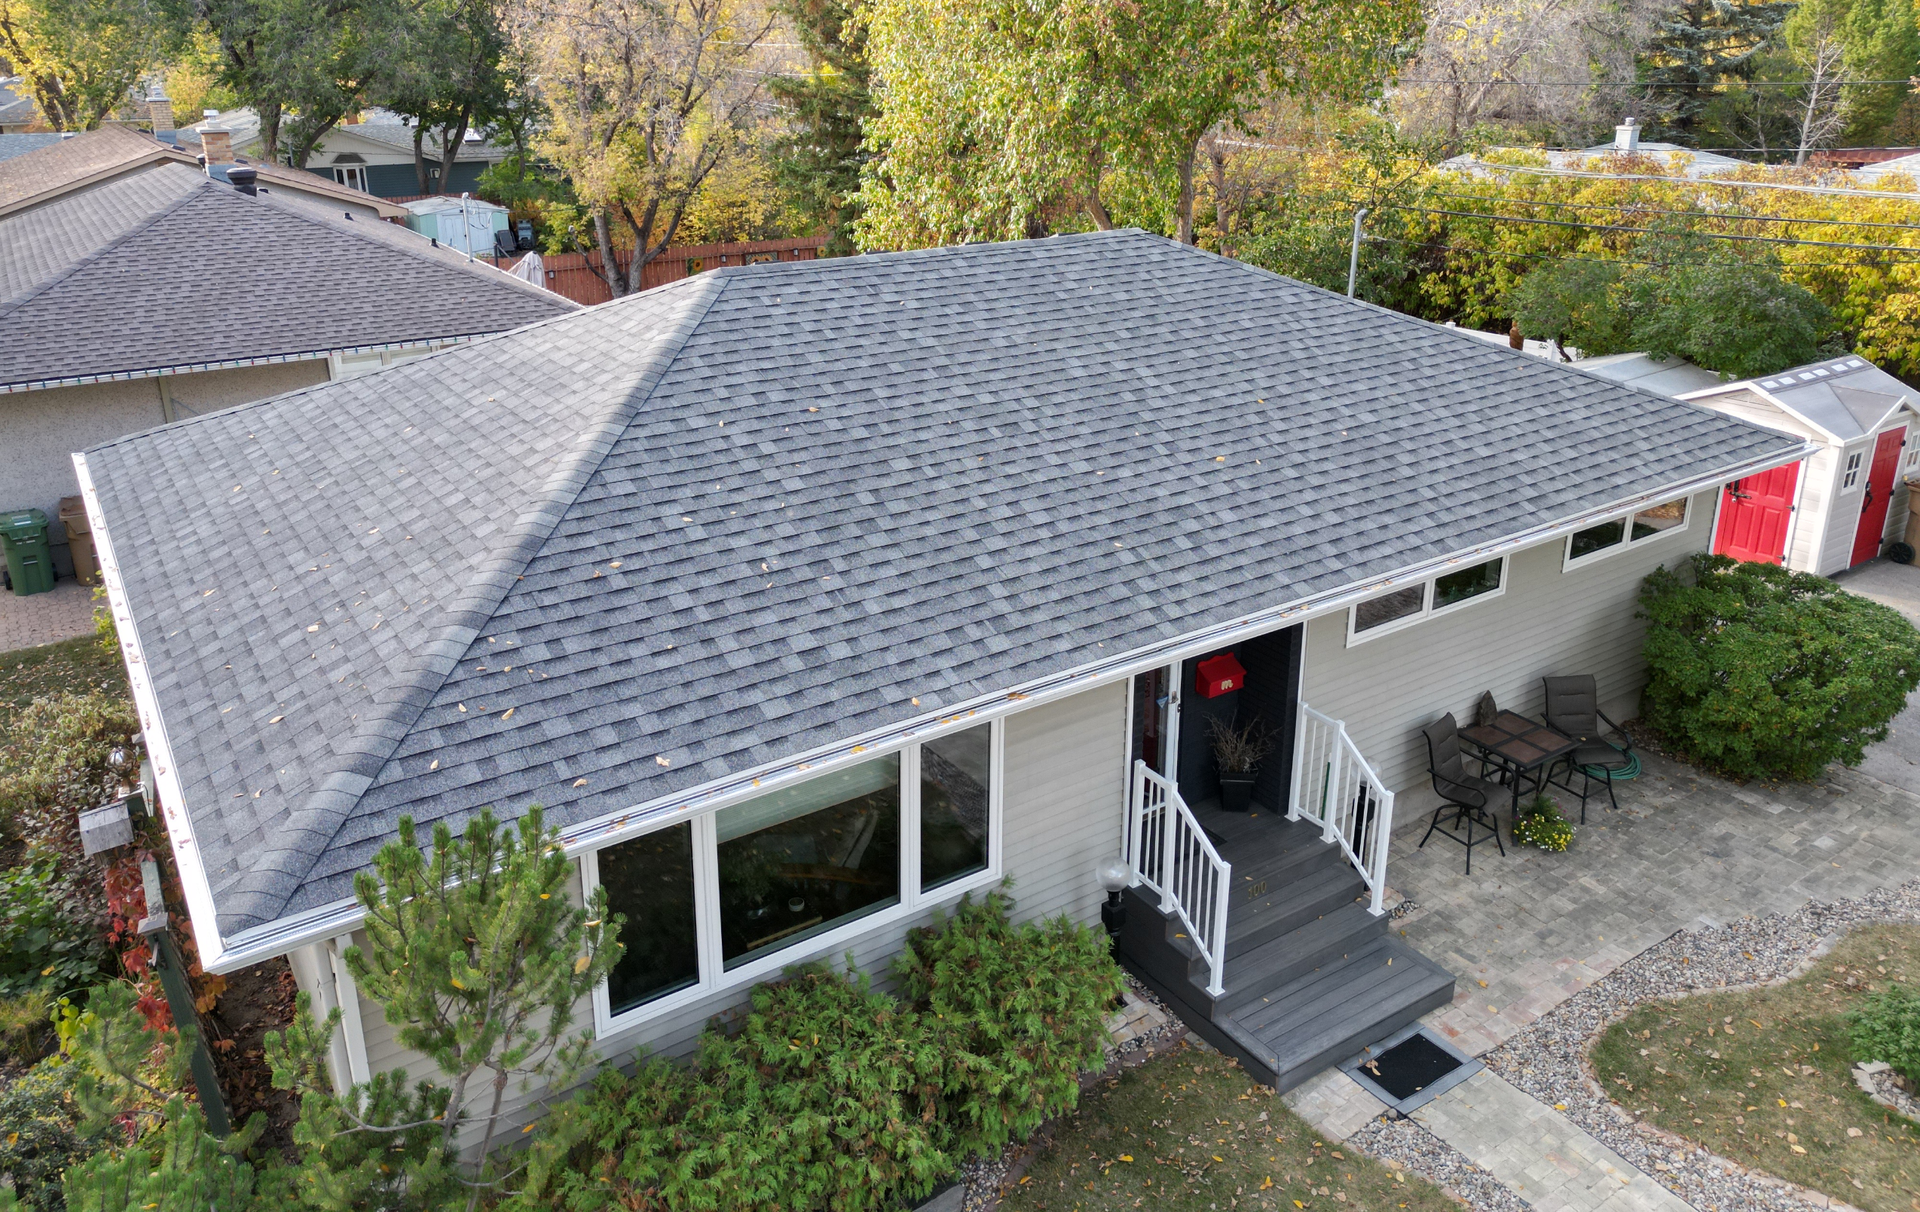 Asphalt shingle roof installed by Regina roofing company, Wiebe's Roofing